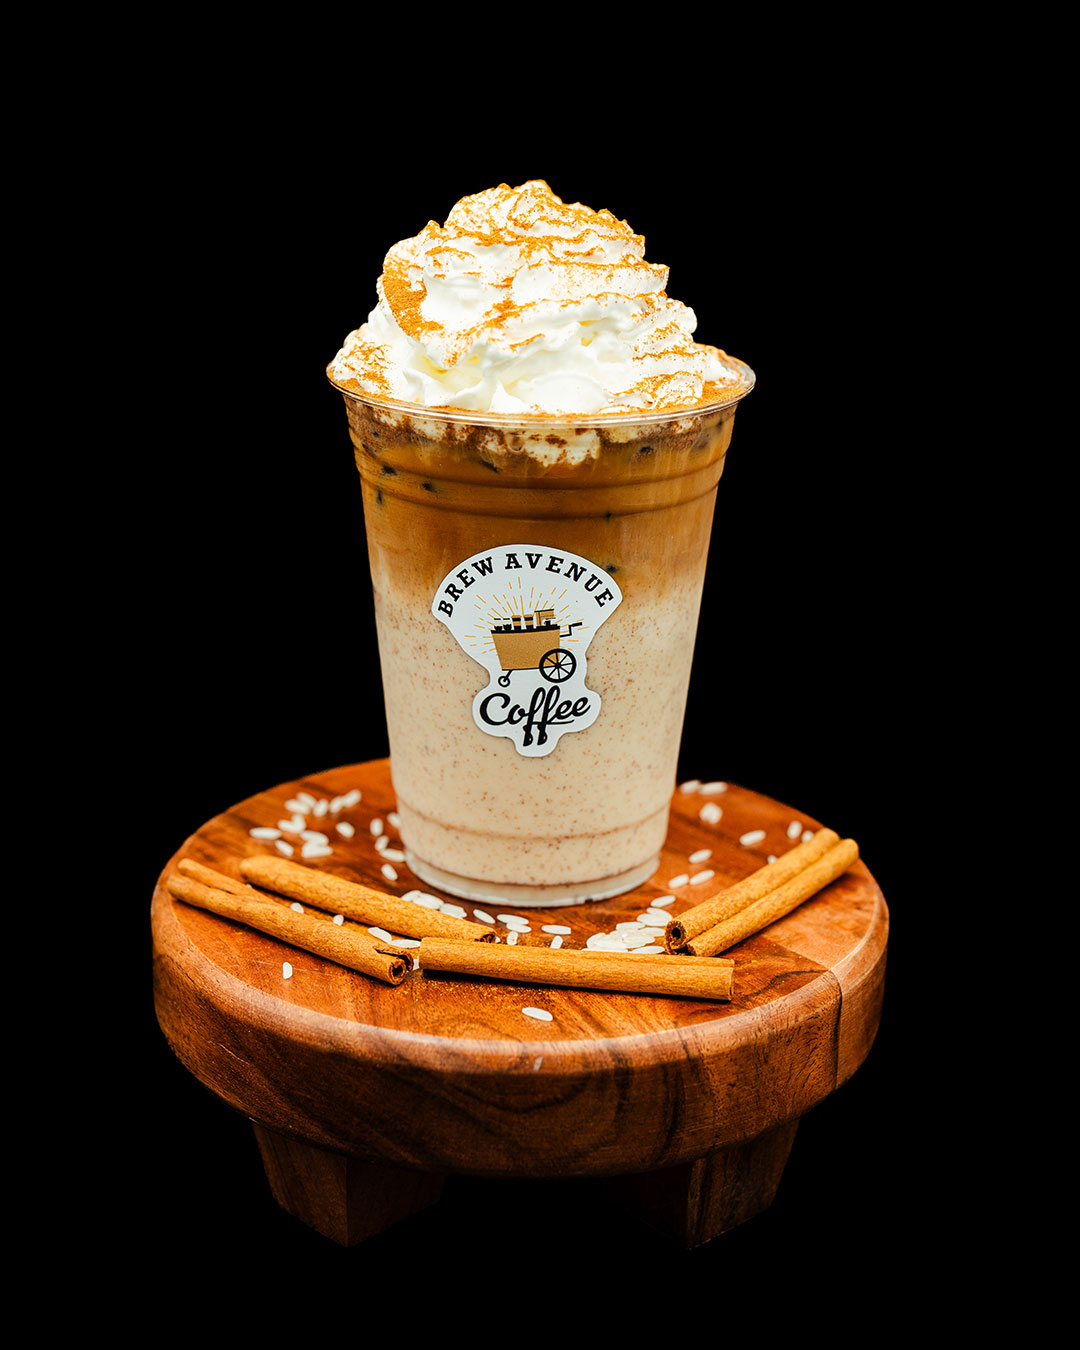 A clear cup with a sticker showing the Brew Avenue Coffee logo is on a wooden stool against a black studio background. The cup is filled with Cafe Horchata with white foam on top and syrup drizzled on top of the foam. Cinnamon sticks and white rice are sprinkled on the stool.